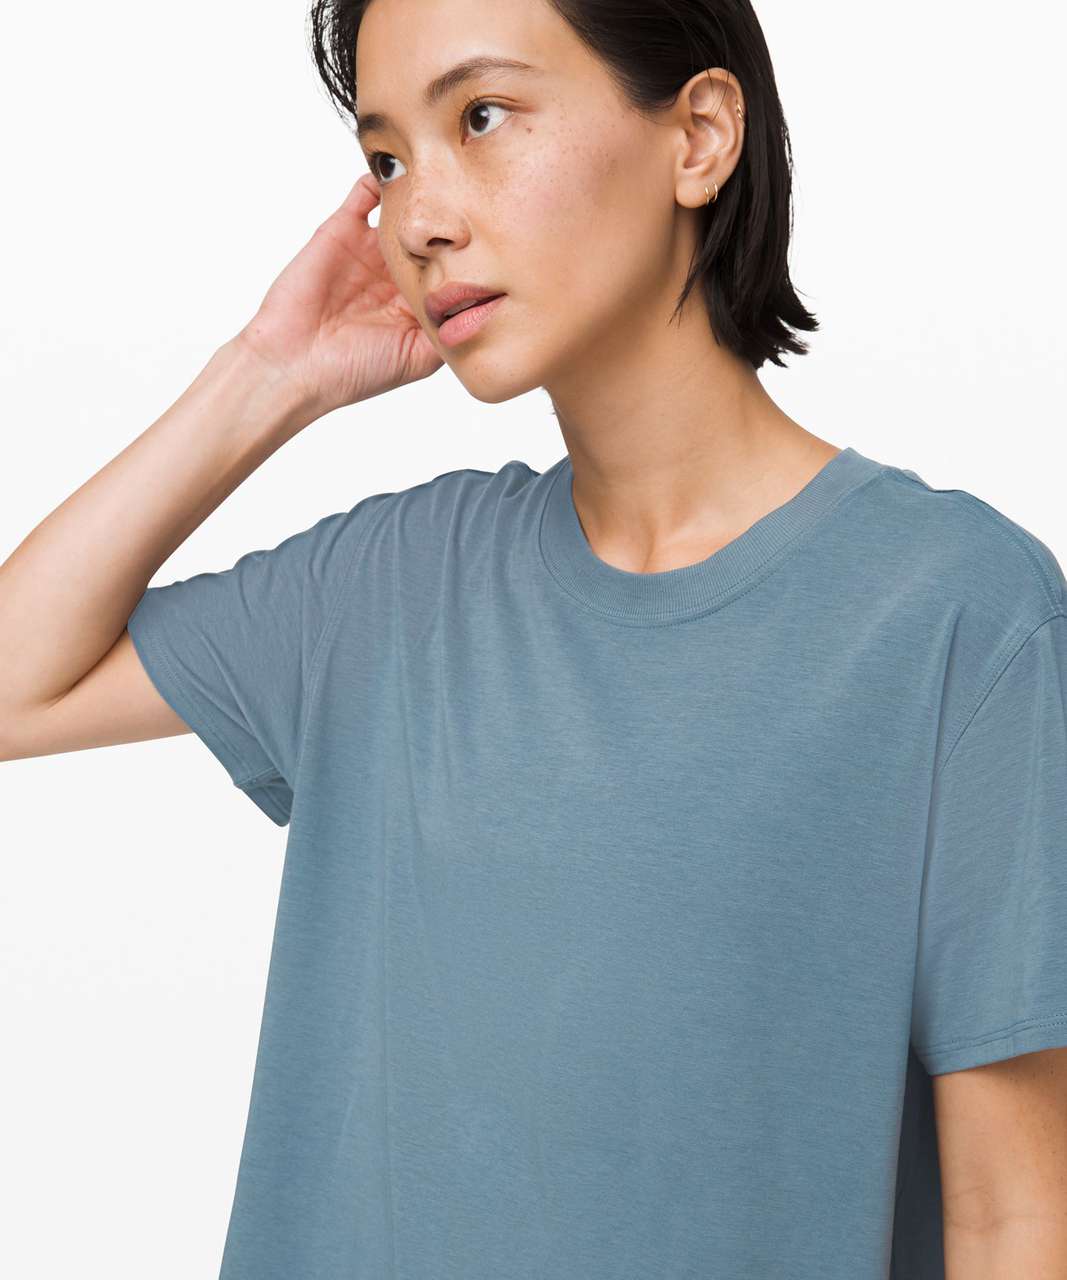 All Yours Short-Sleeve T-Shirt *Vitasea